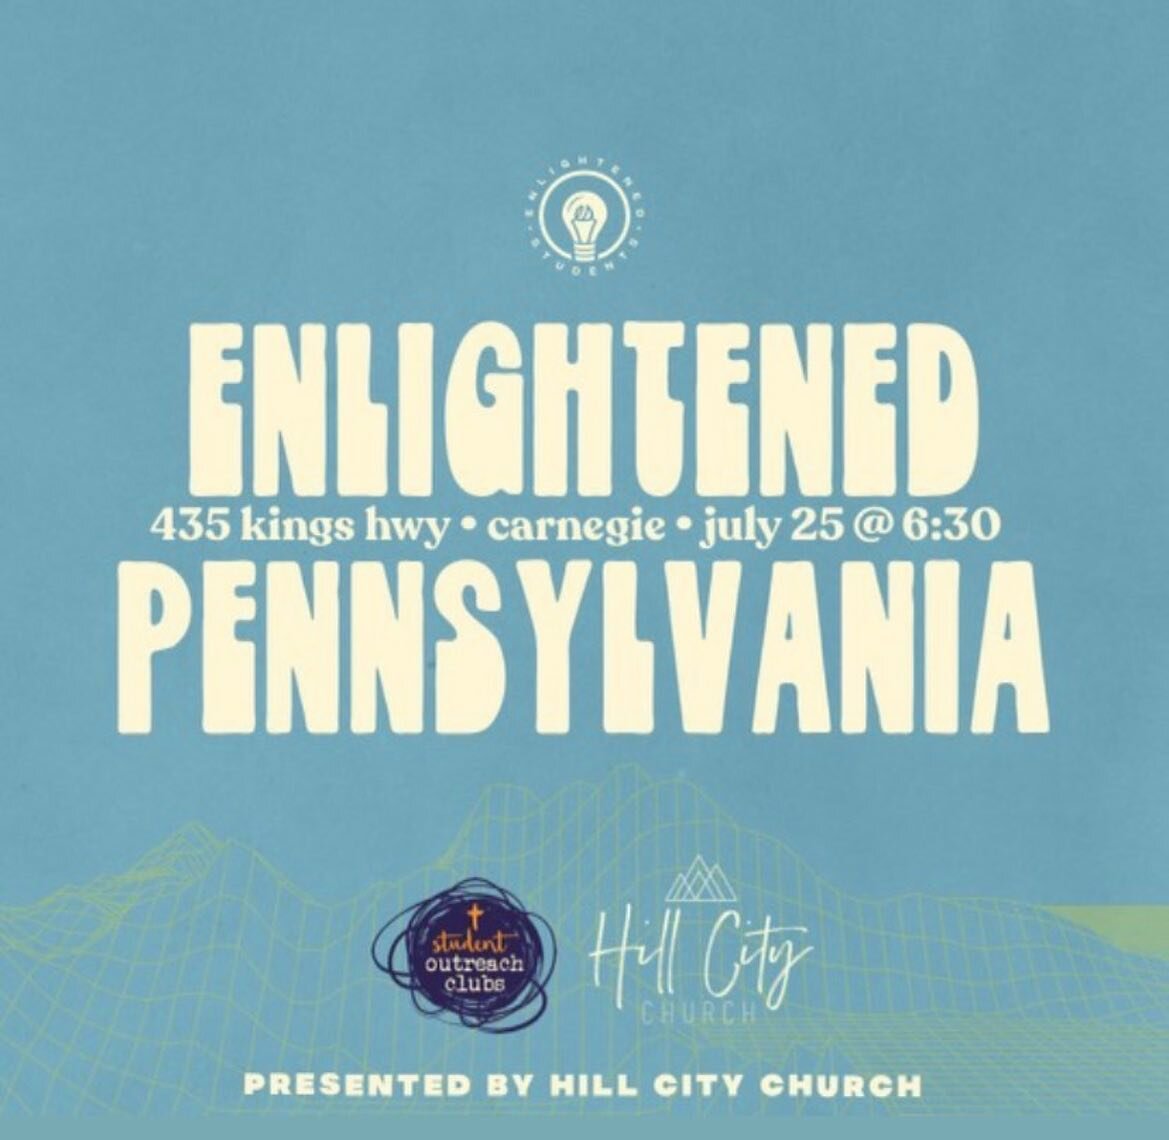 We are SO excited to host the Enlightened Student Prayer night here in Pittsburgh! This is an entirely student ran event, open to all youth groups and school based youth ministries in Western PA! We even. Have some of our own student sharing their te